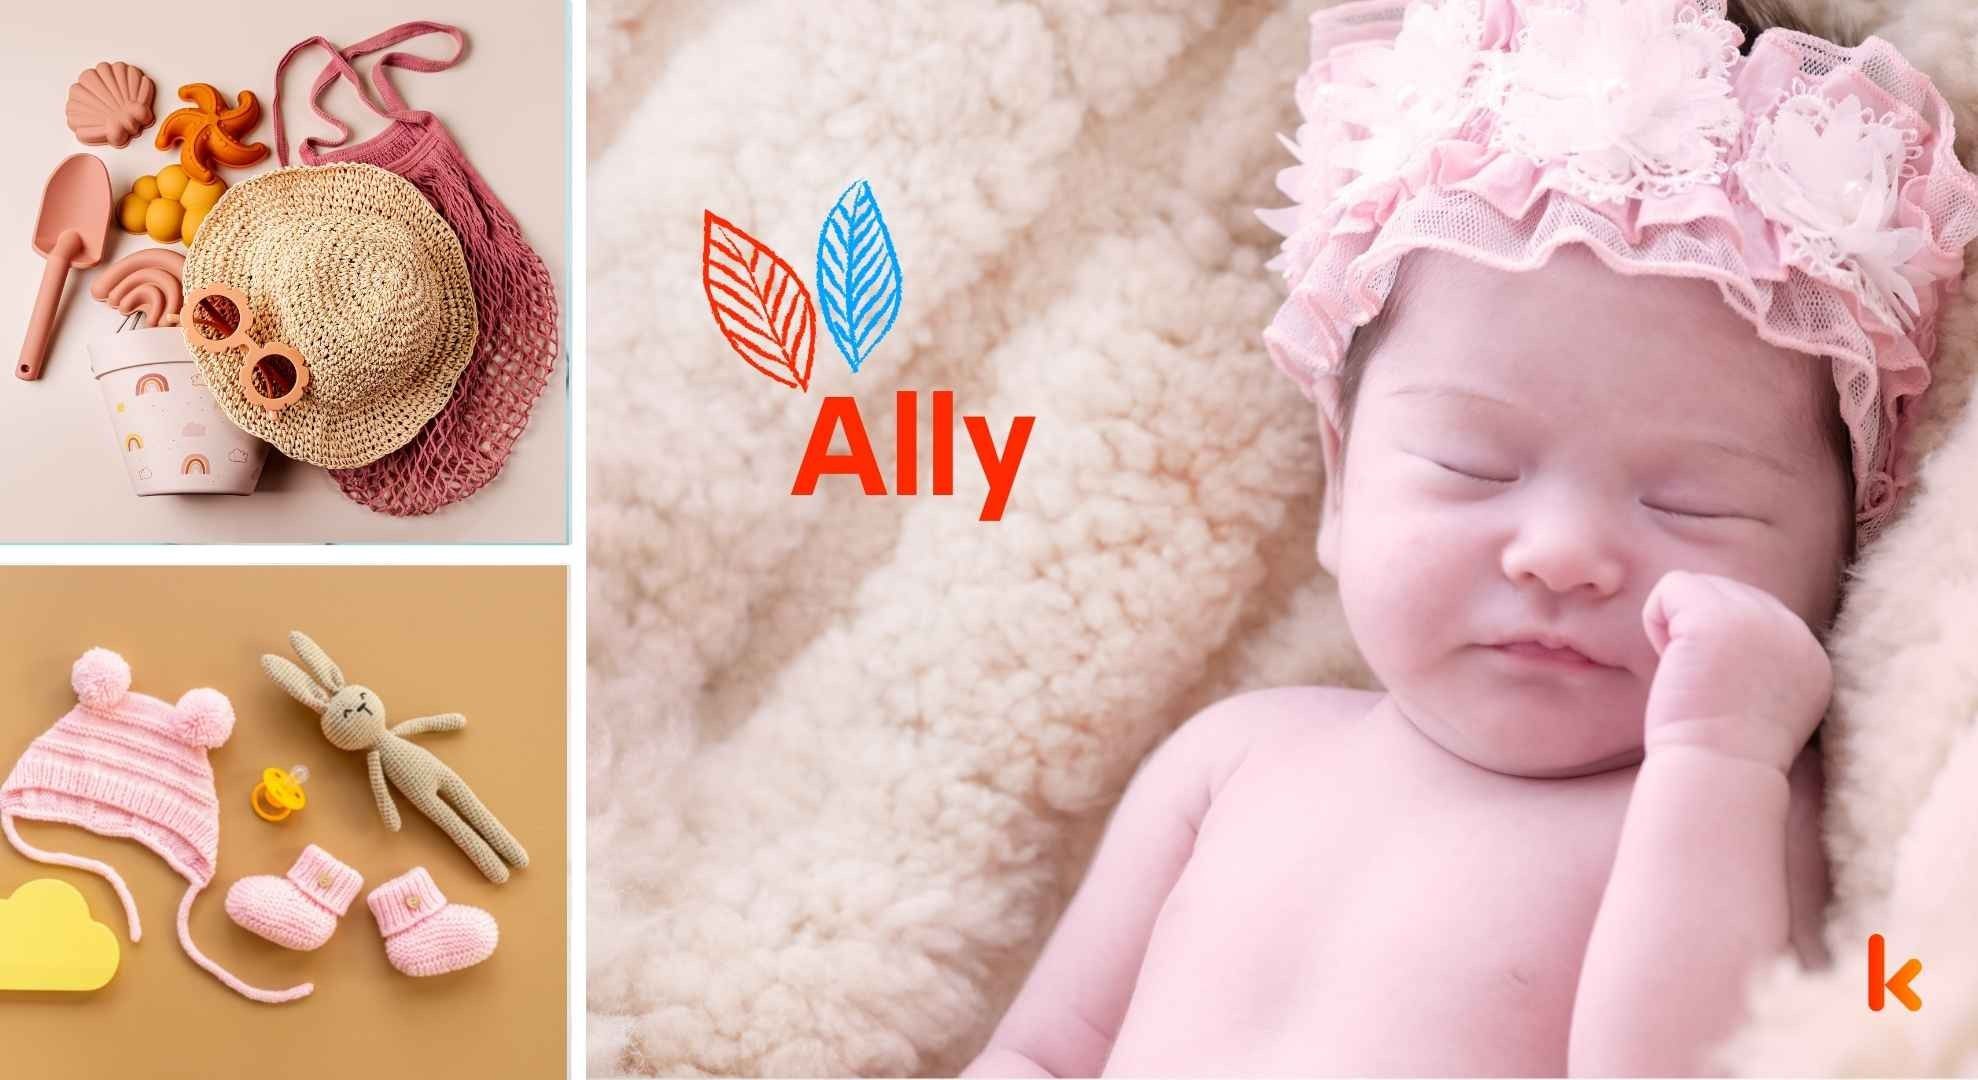 Baby name Ally- cute baby, accessories